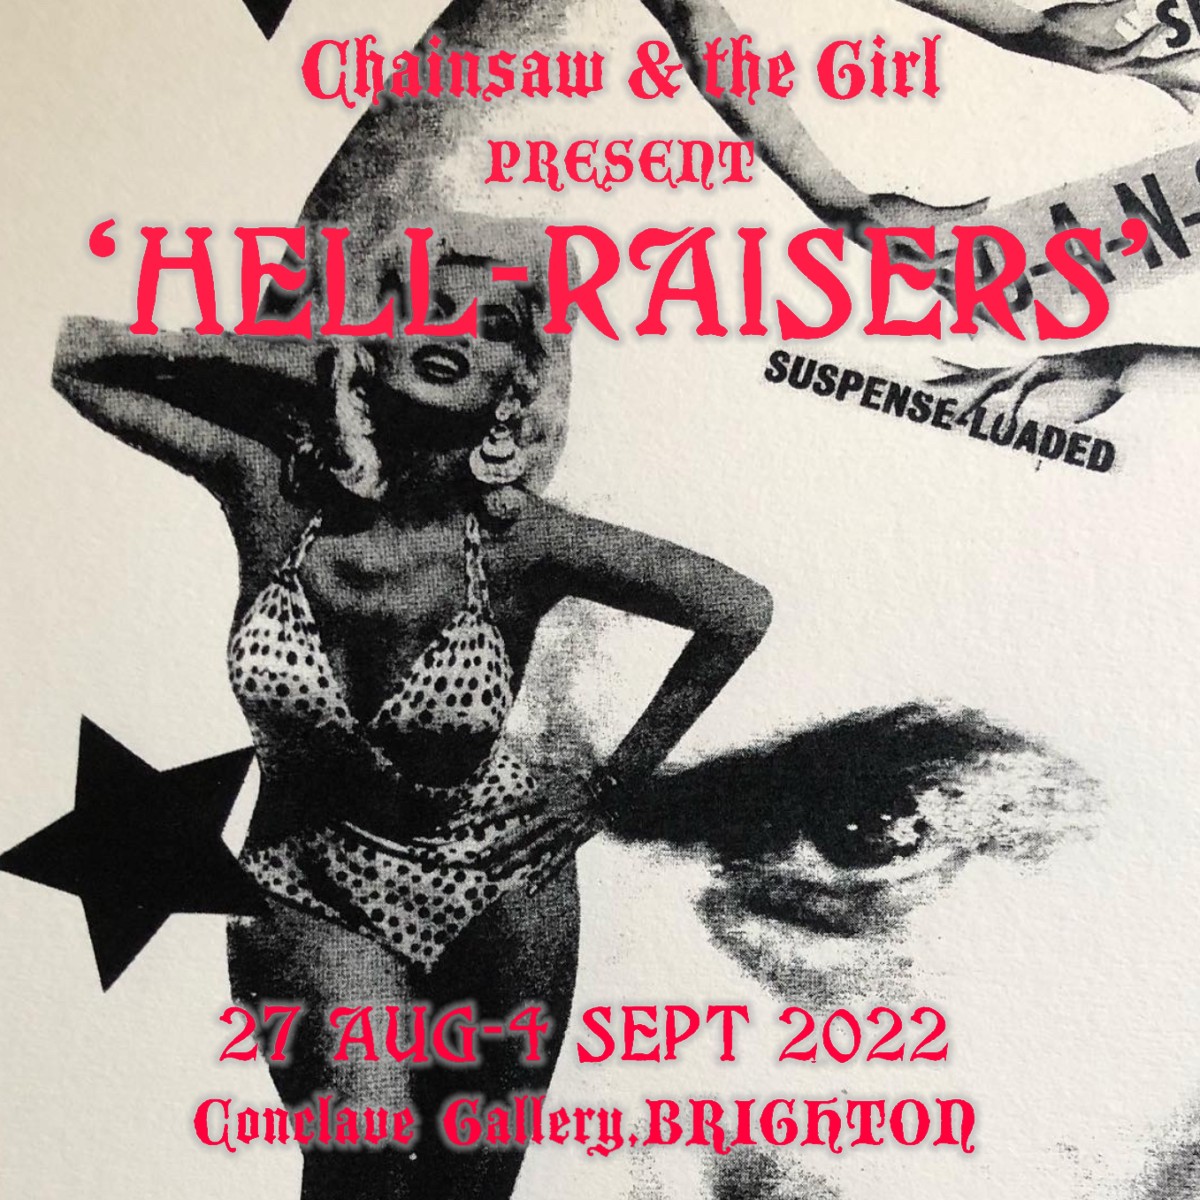 CONCLAVE PRESENTS: Chainsaw & The Girl: Hell-raisers